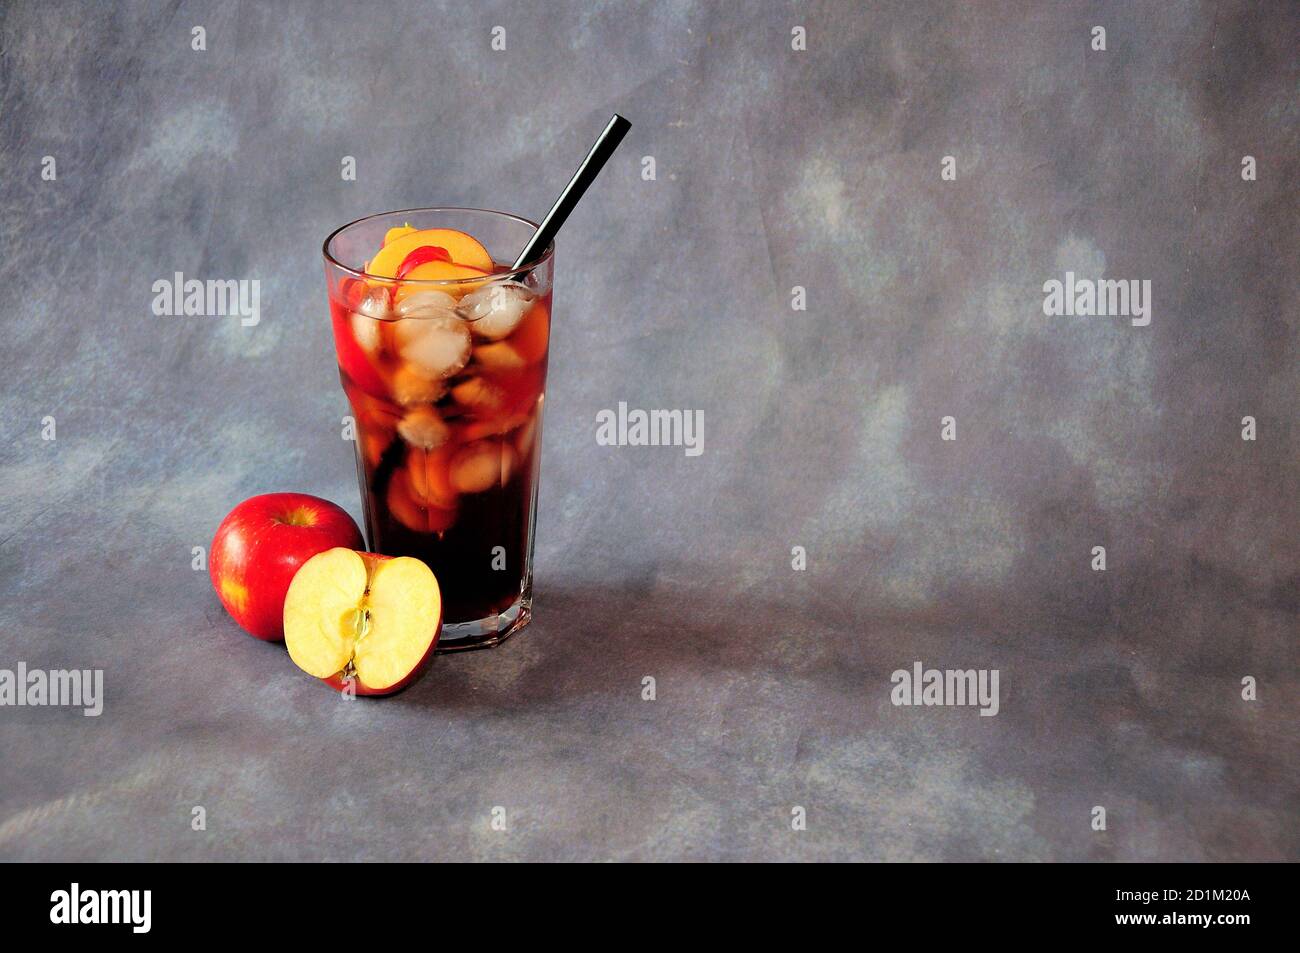 A tall glass of red juice with ice, a stick and two ripe apples on a gray background. Close-up. Stock Photo